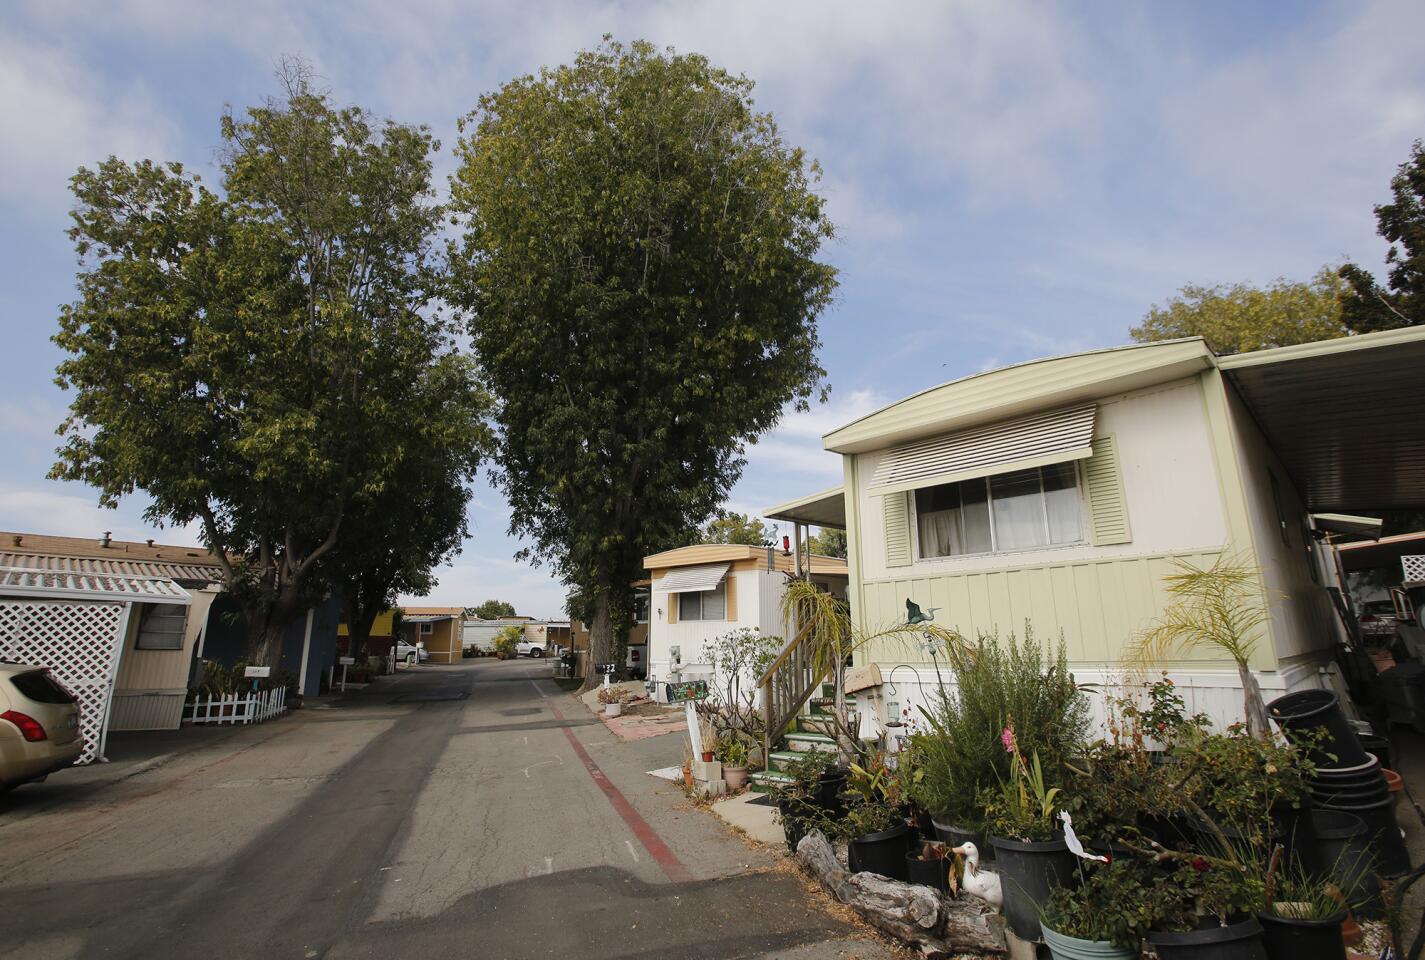 A view of an upper street in the Capistrano Terrace Mobile Home Park in San Juan Capistrano.